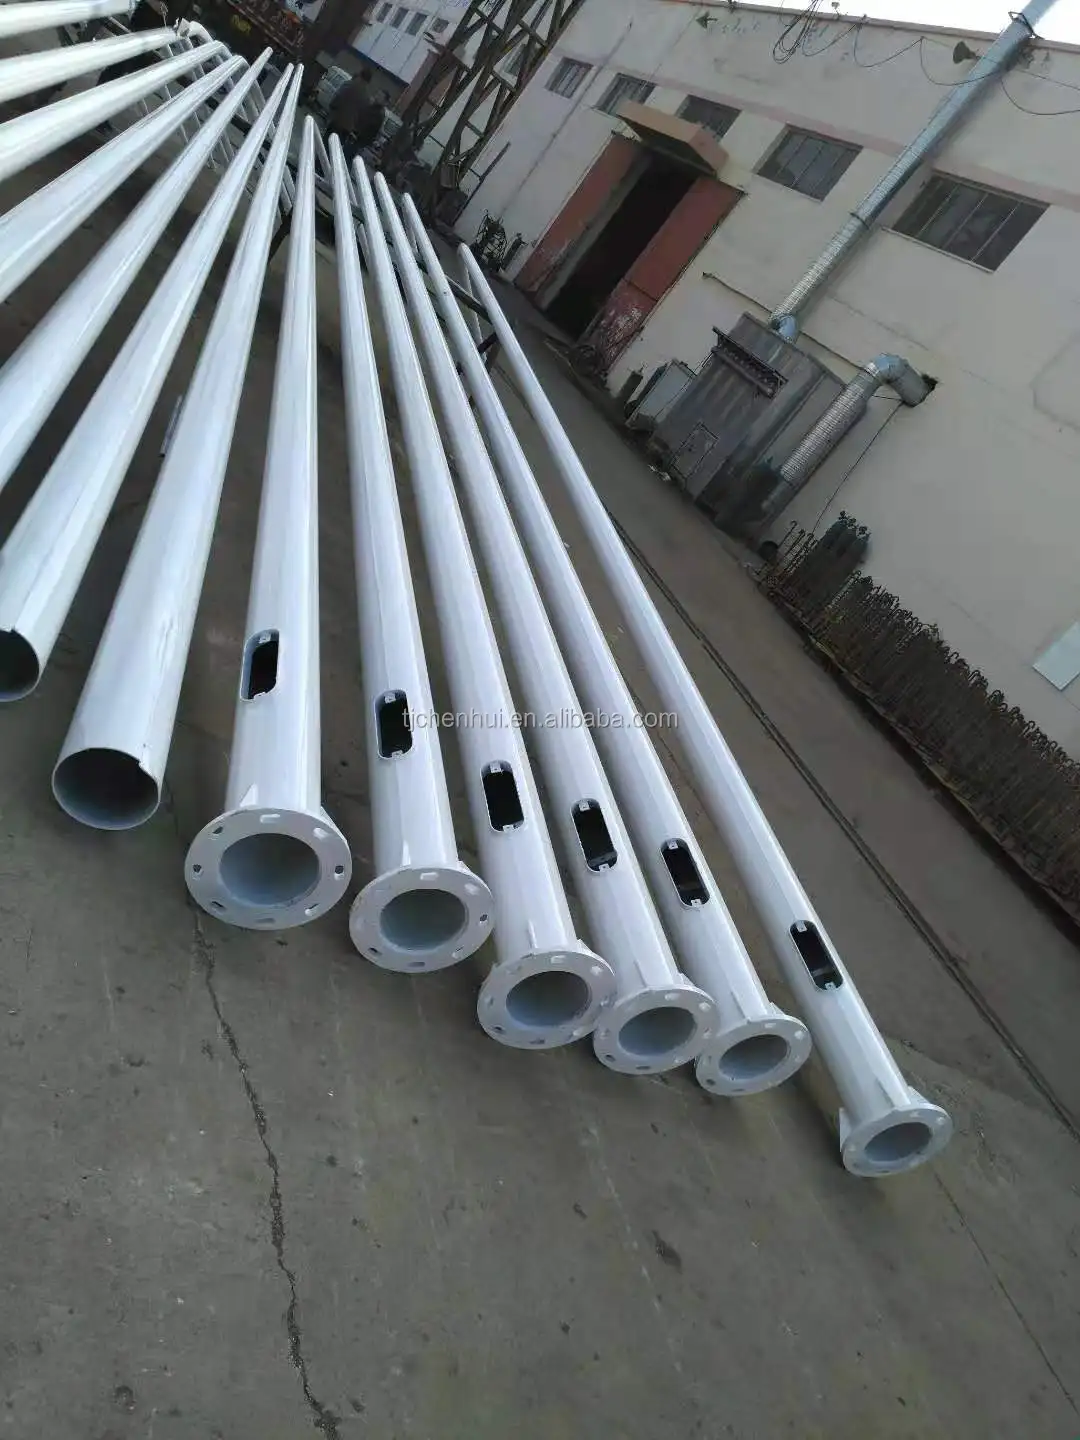 
8m 9m 10m China lamp pole factory manufacture steel hot dip galvanized road lighting pole with double detachable lighting arm 